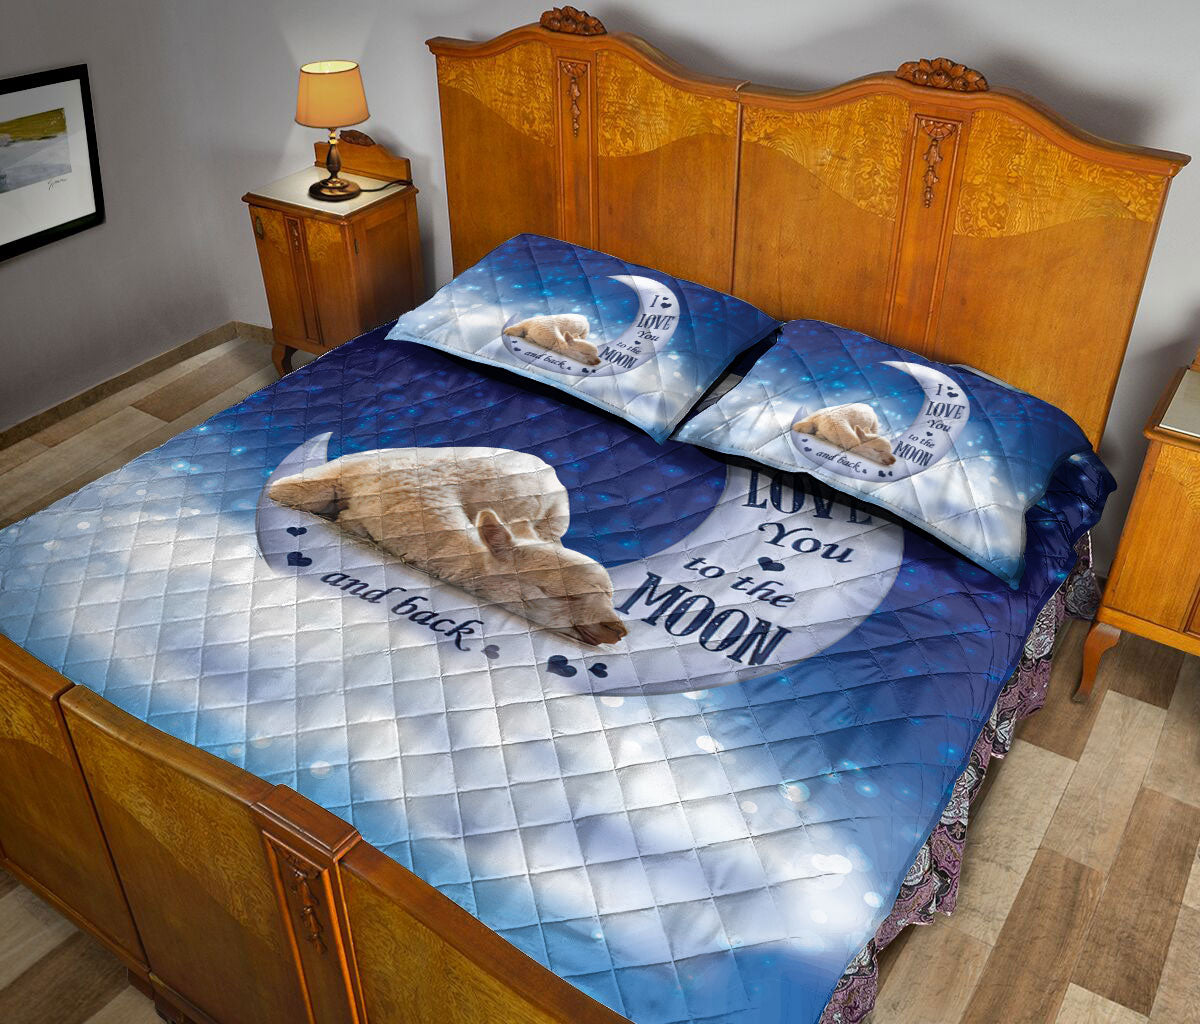 Ohaprints-Quilt-Bed-Set-Pillowcase-Sleeping-Alpaca-Llama-I-Love-You-To-The-Moon-And-Back-Gift-For-Animal-Lover-Blanket-Bedspread-Bedding-244-Queen (80'' x 90'')